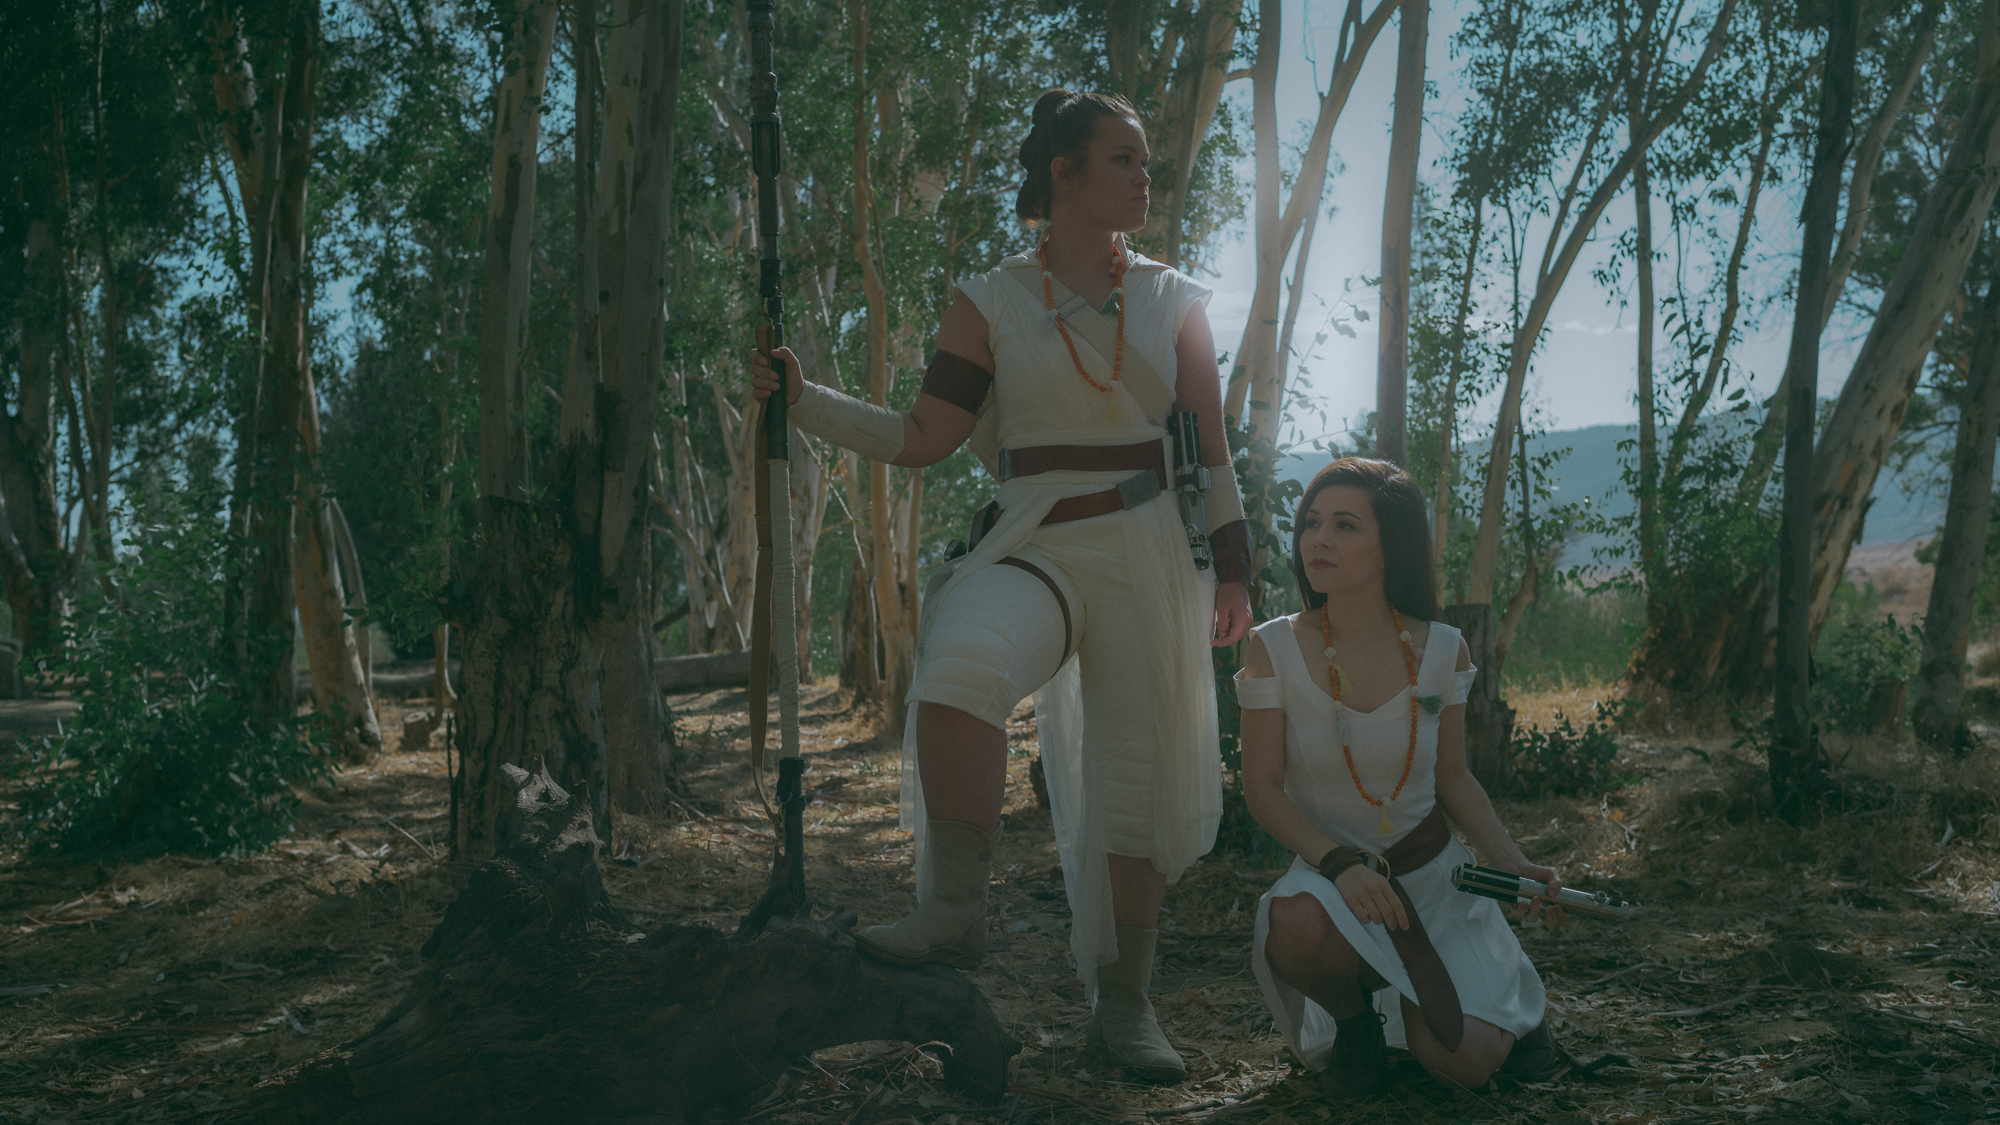 Star Wars Cosplay vs. Bounding - Featuring Rey from The Rise of Skywalker | Anakin and His Angel